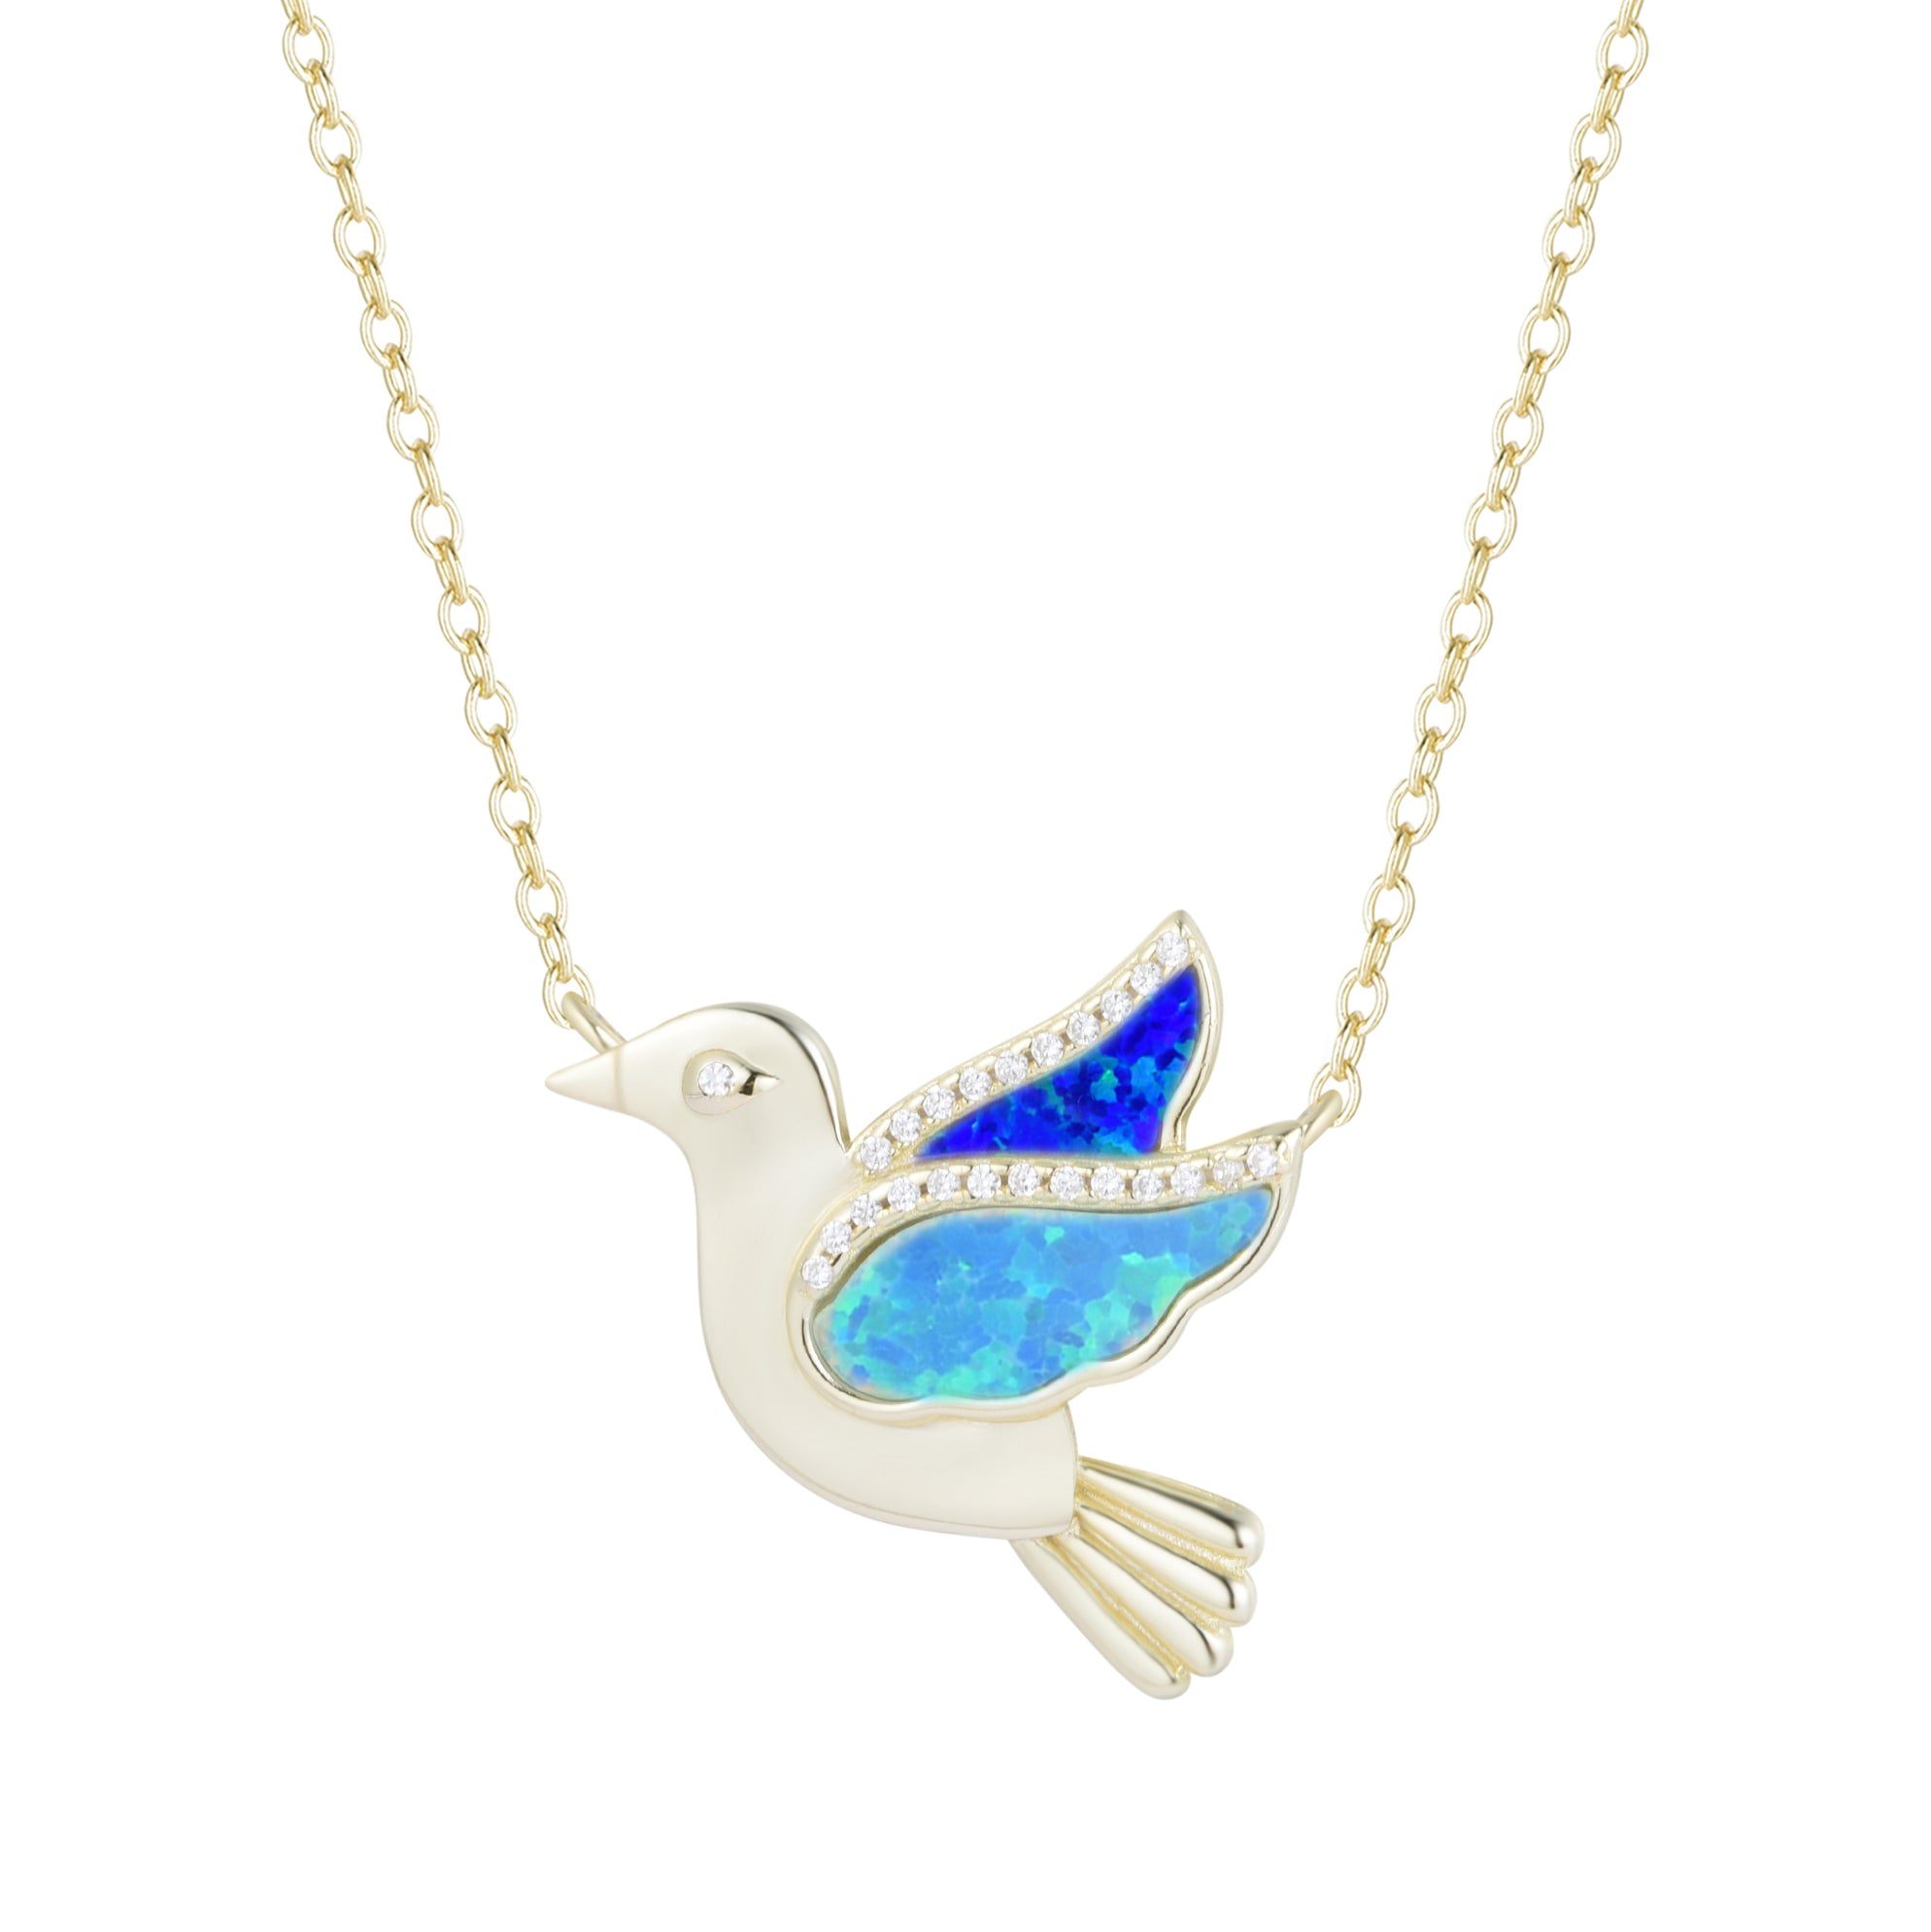 opal bird necklace with crystals blue green and indigo opal